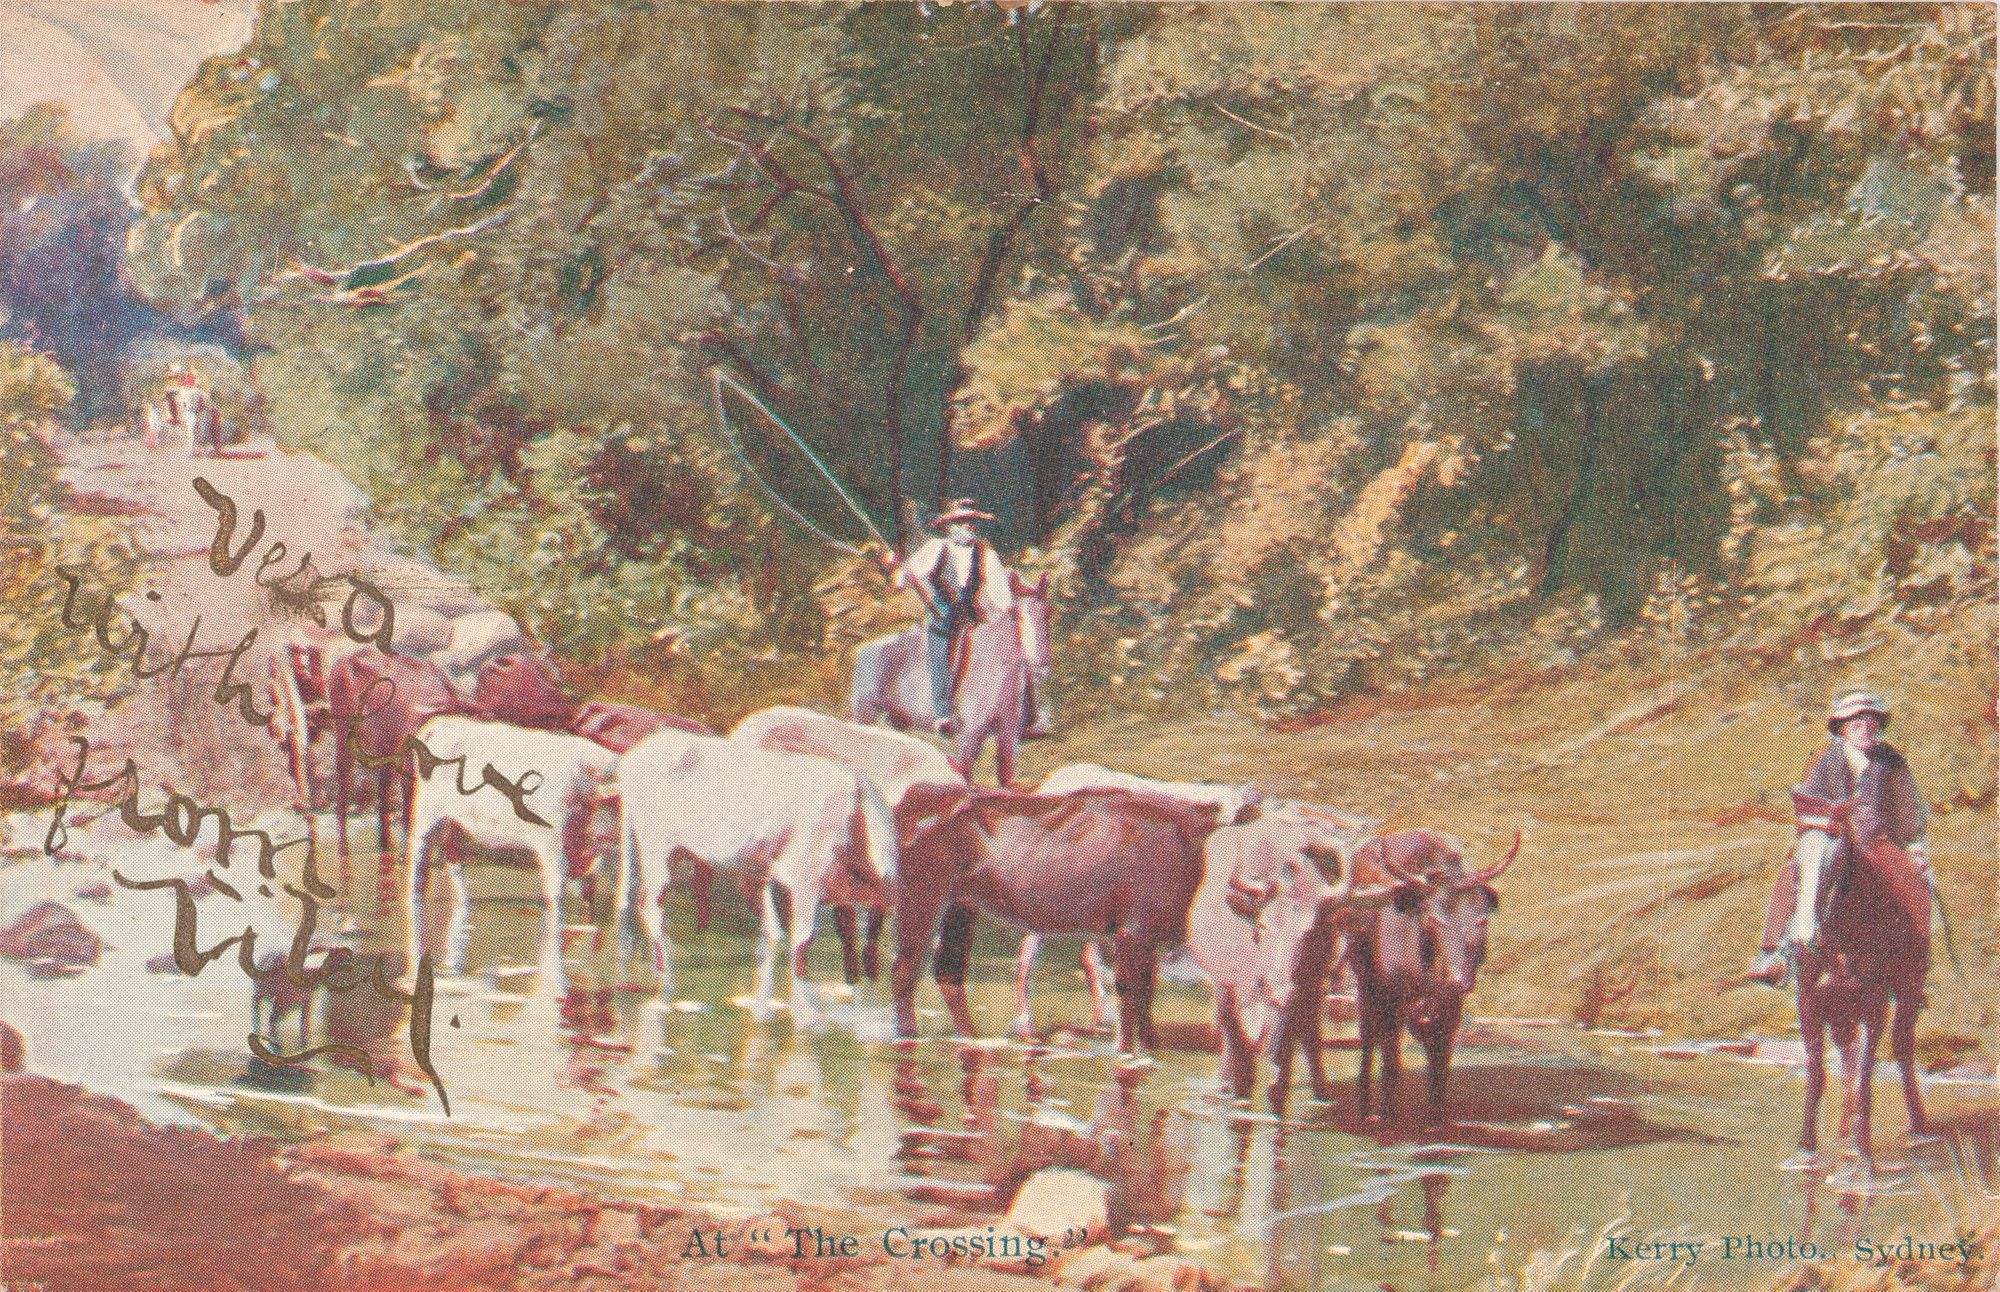 Postcard design with photo of cows crossing a creek